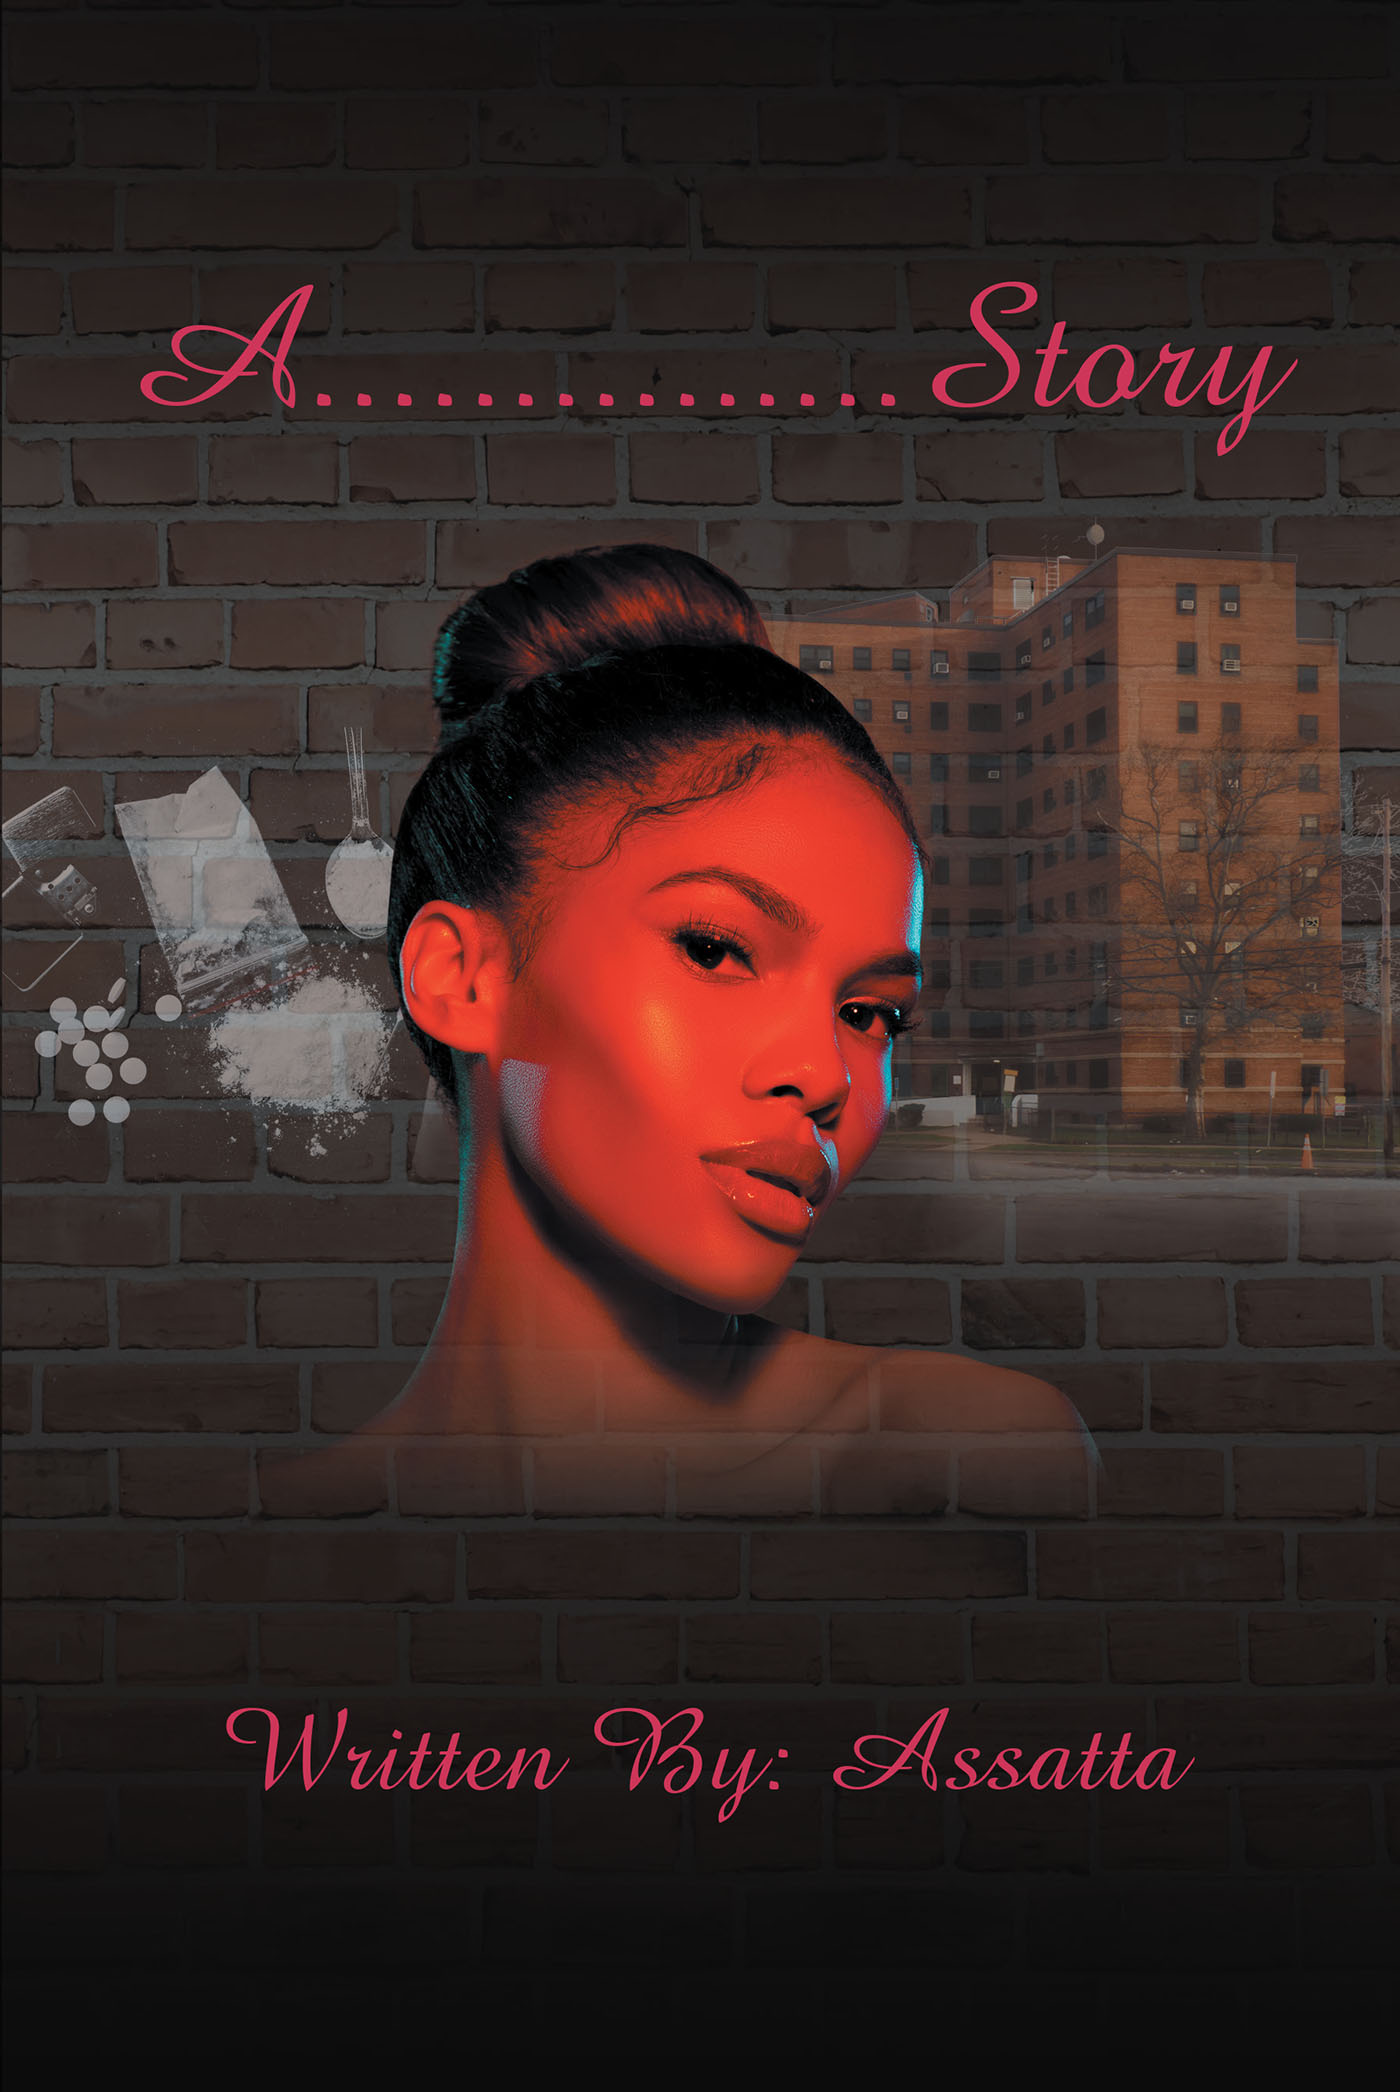 Author Assatta’s New Book, “A…………… Story,” Follows a Young Woman's Struggles to Discover Her Own Path in Life After the Death of Her Aunt Leaves Her World Shattered